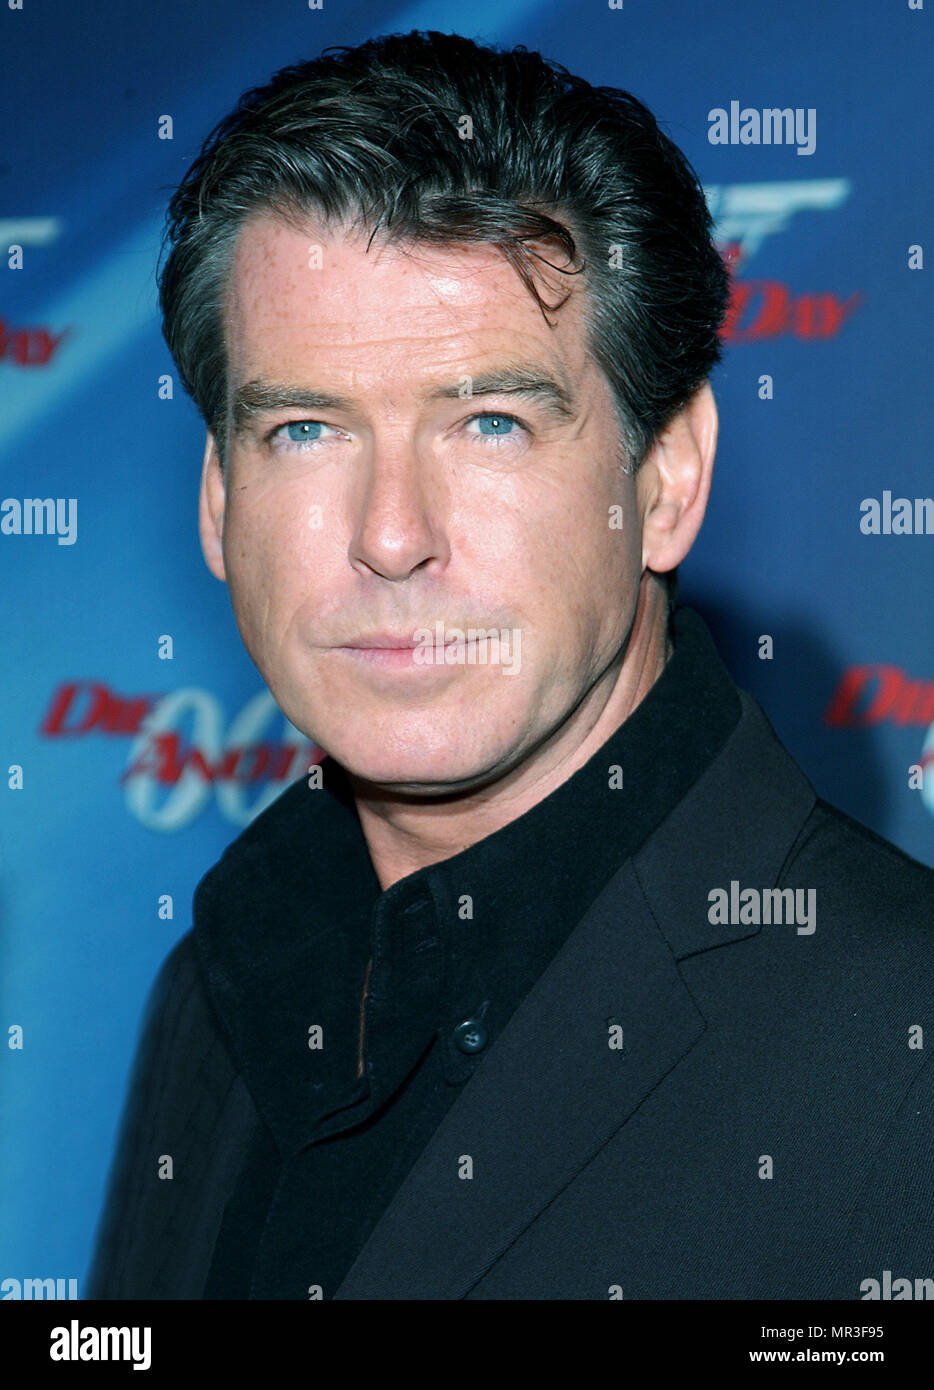 Pierce Brosnan arriving at the premiere of 'Die Another Day' at the Shrine Auditorium in Los Angeles. November 11, 2002. BrosnanPierce109 Red Carpet Event, Vertical, USA, Film Industry, Celebrities,  Photography, Bestof, Arts Culture and Entertainment, Topix Celebrities fashion /  Vertical, Best of, Event in Hollywood Life - California,  Red Carpet and backstage, USA, Film Industry, Celebrities,  movie celebrities, TV celebrities, Music celebrities, Photography, Bestof, Arts Culture and Entertainment,  Topix, headshot, vertical, one person,, from the year , 2002, inquiry tsuni@Gamma-USA.com Stock Photo